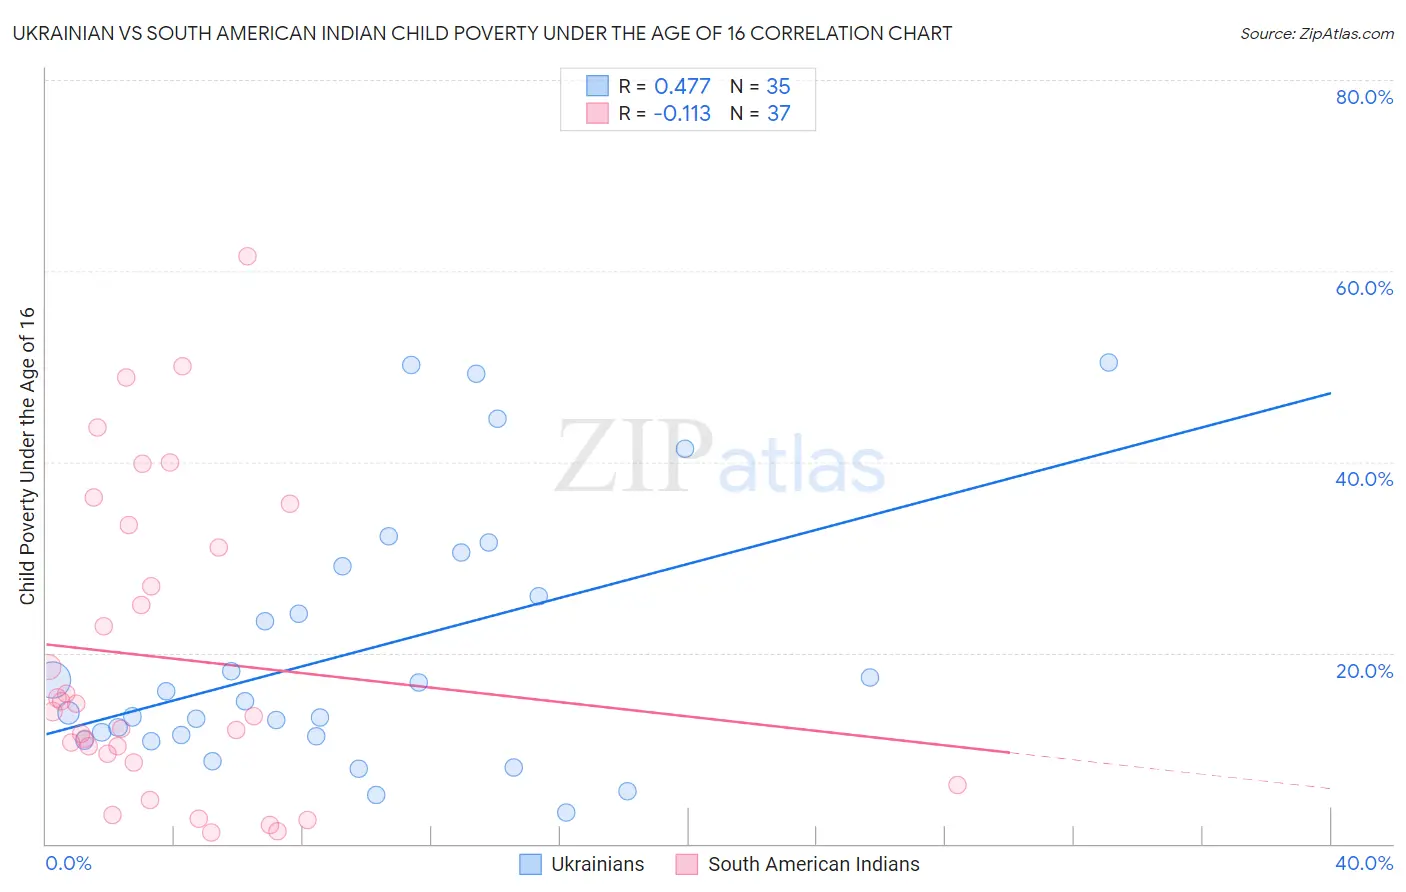 Ukrainian vs South American Indian Child Poverty Under the Age of 16